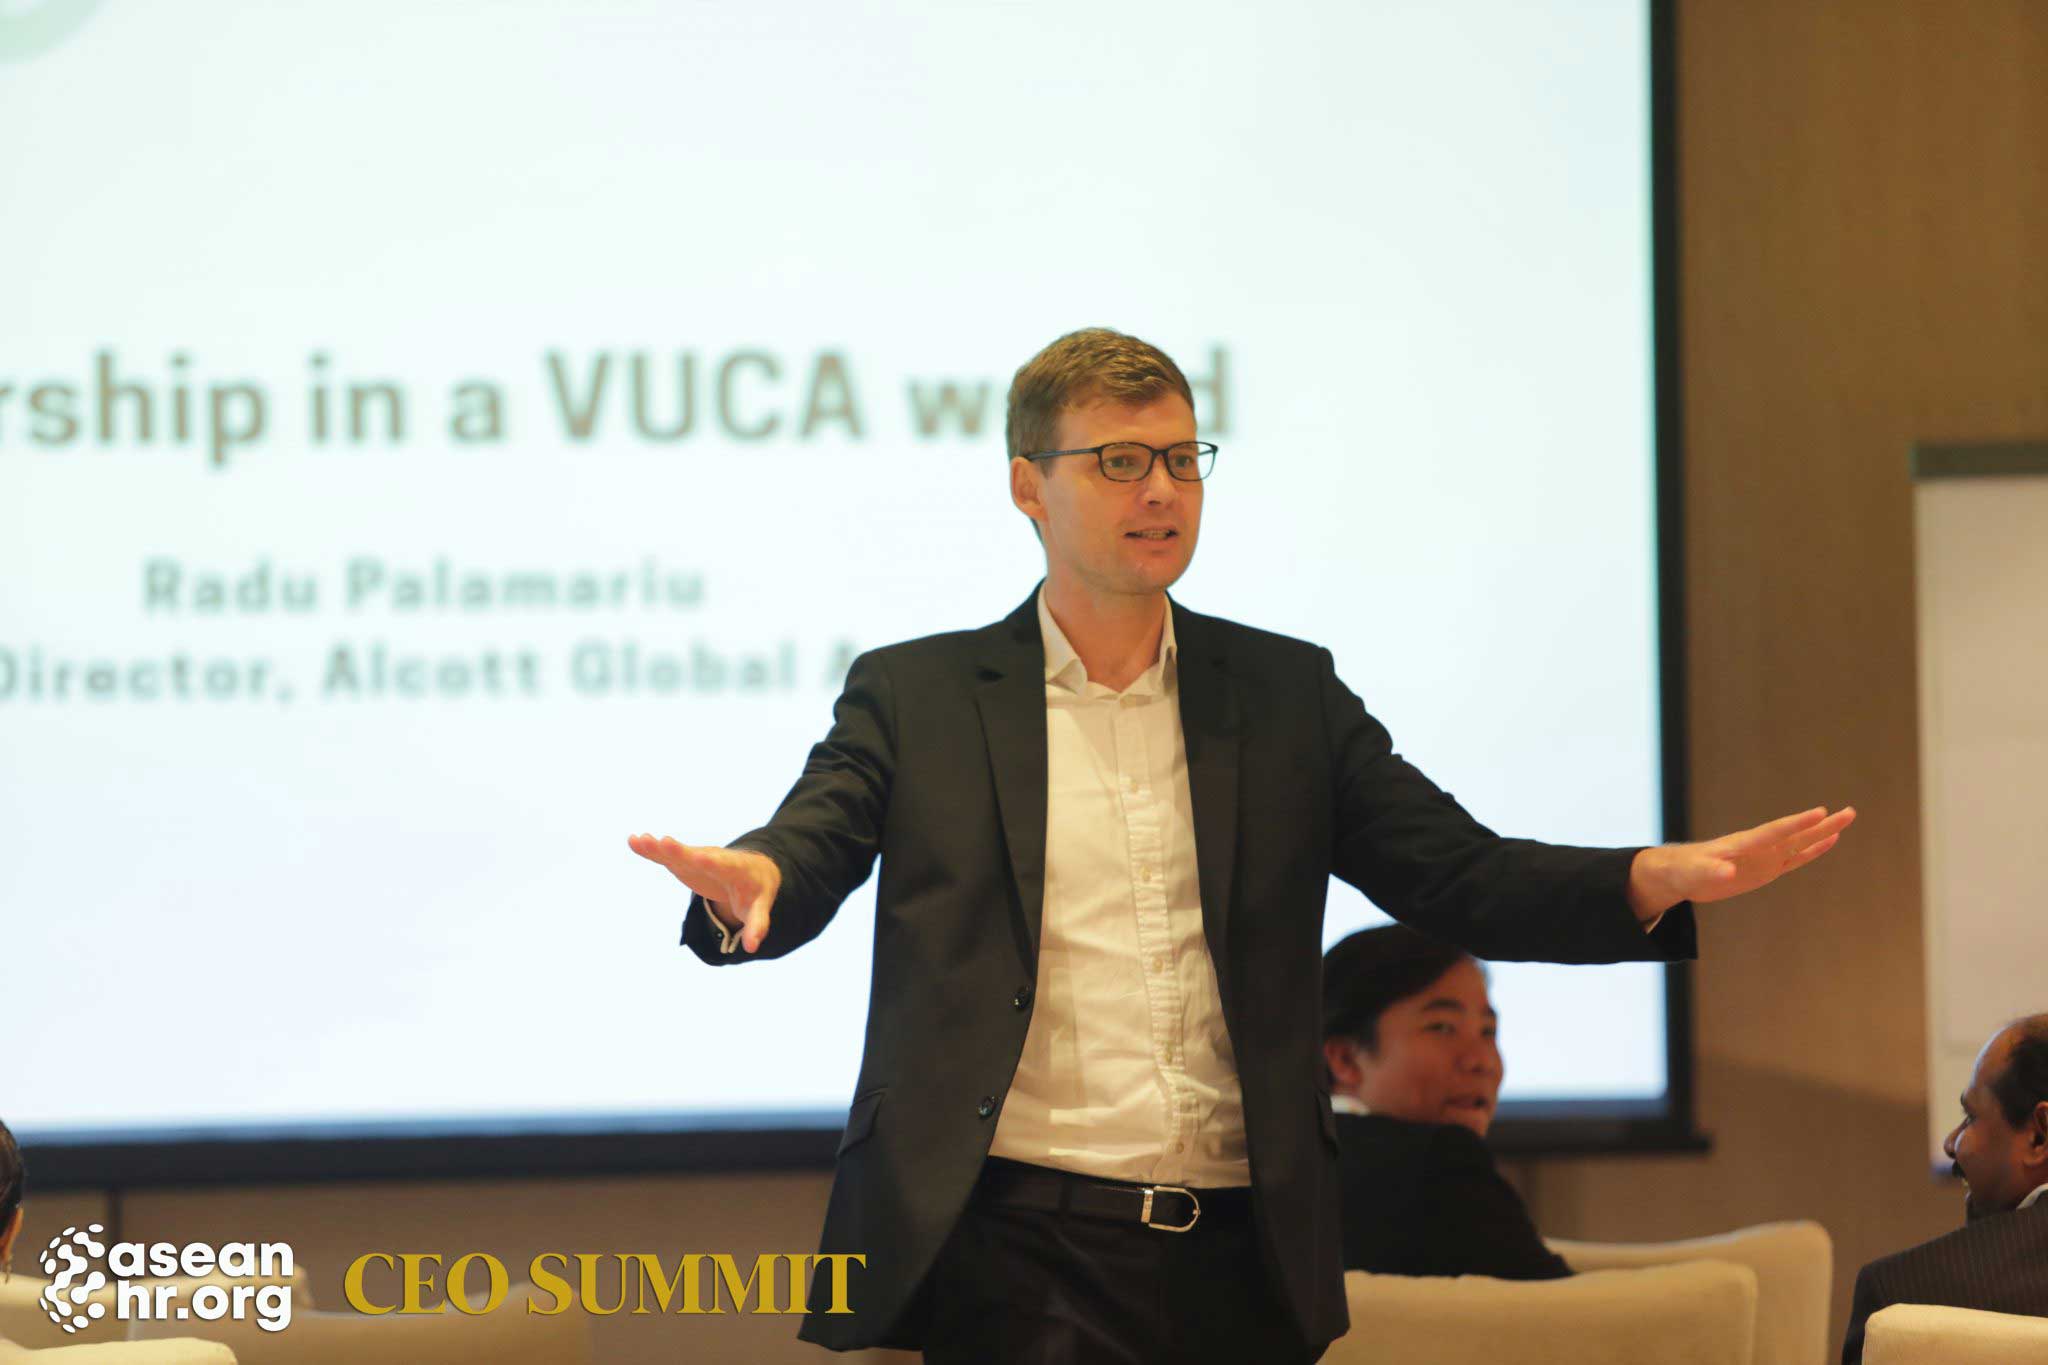 ceo-summit-2019-v1-featured-image